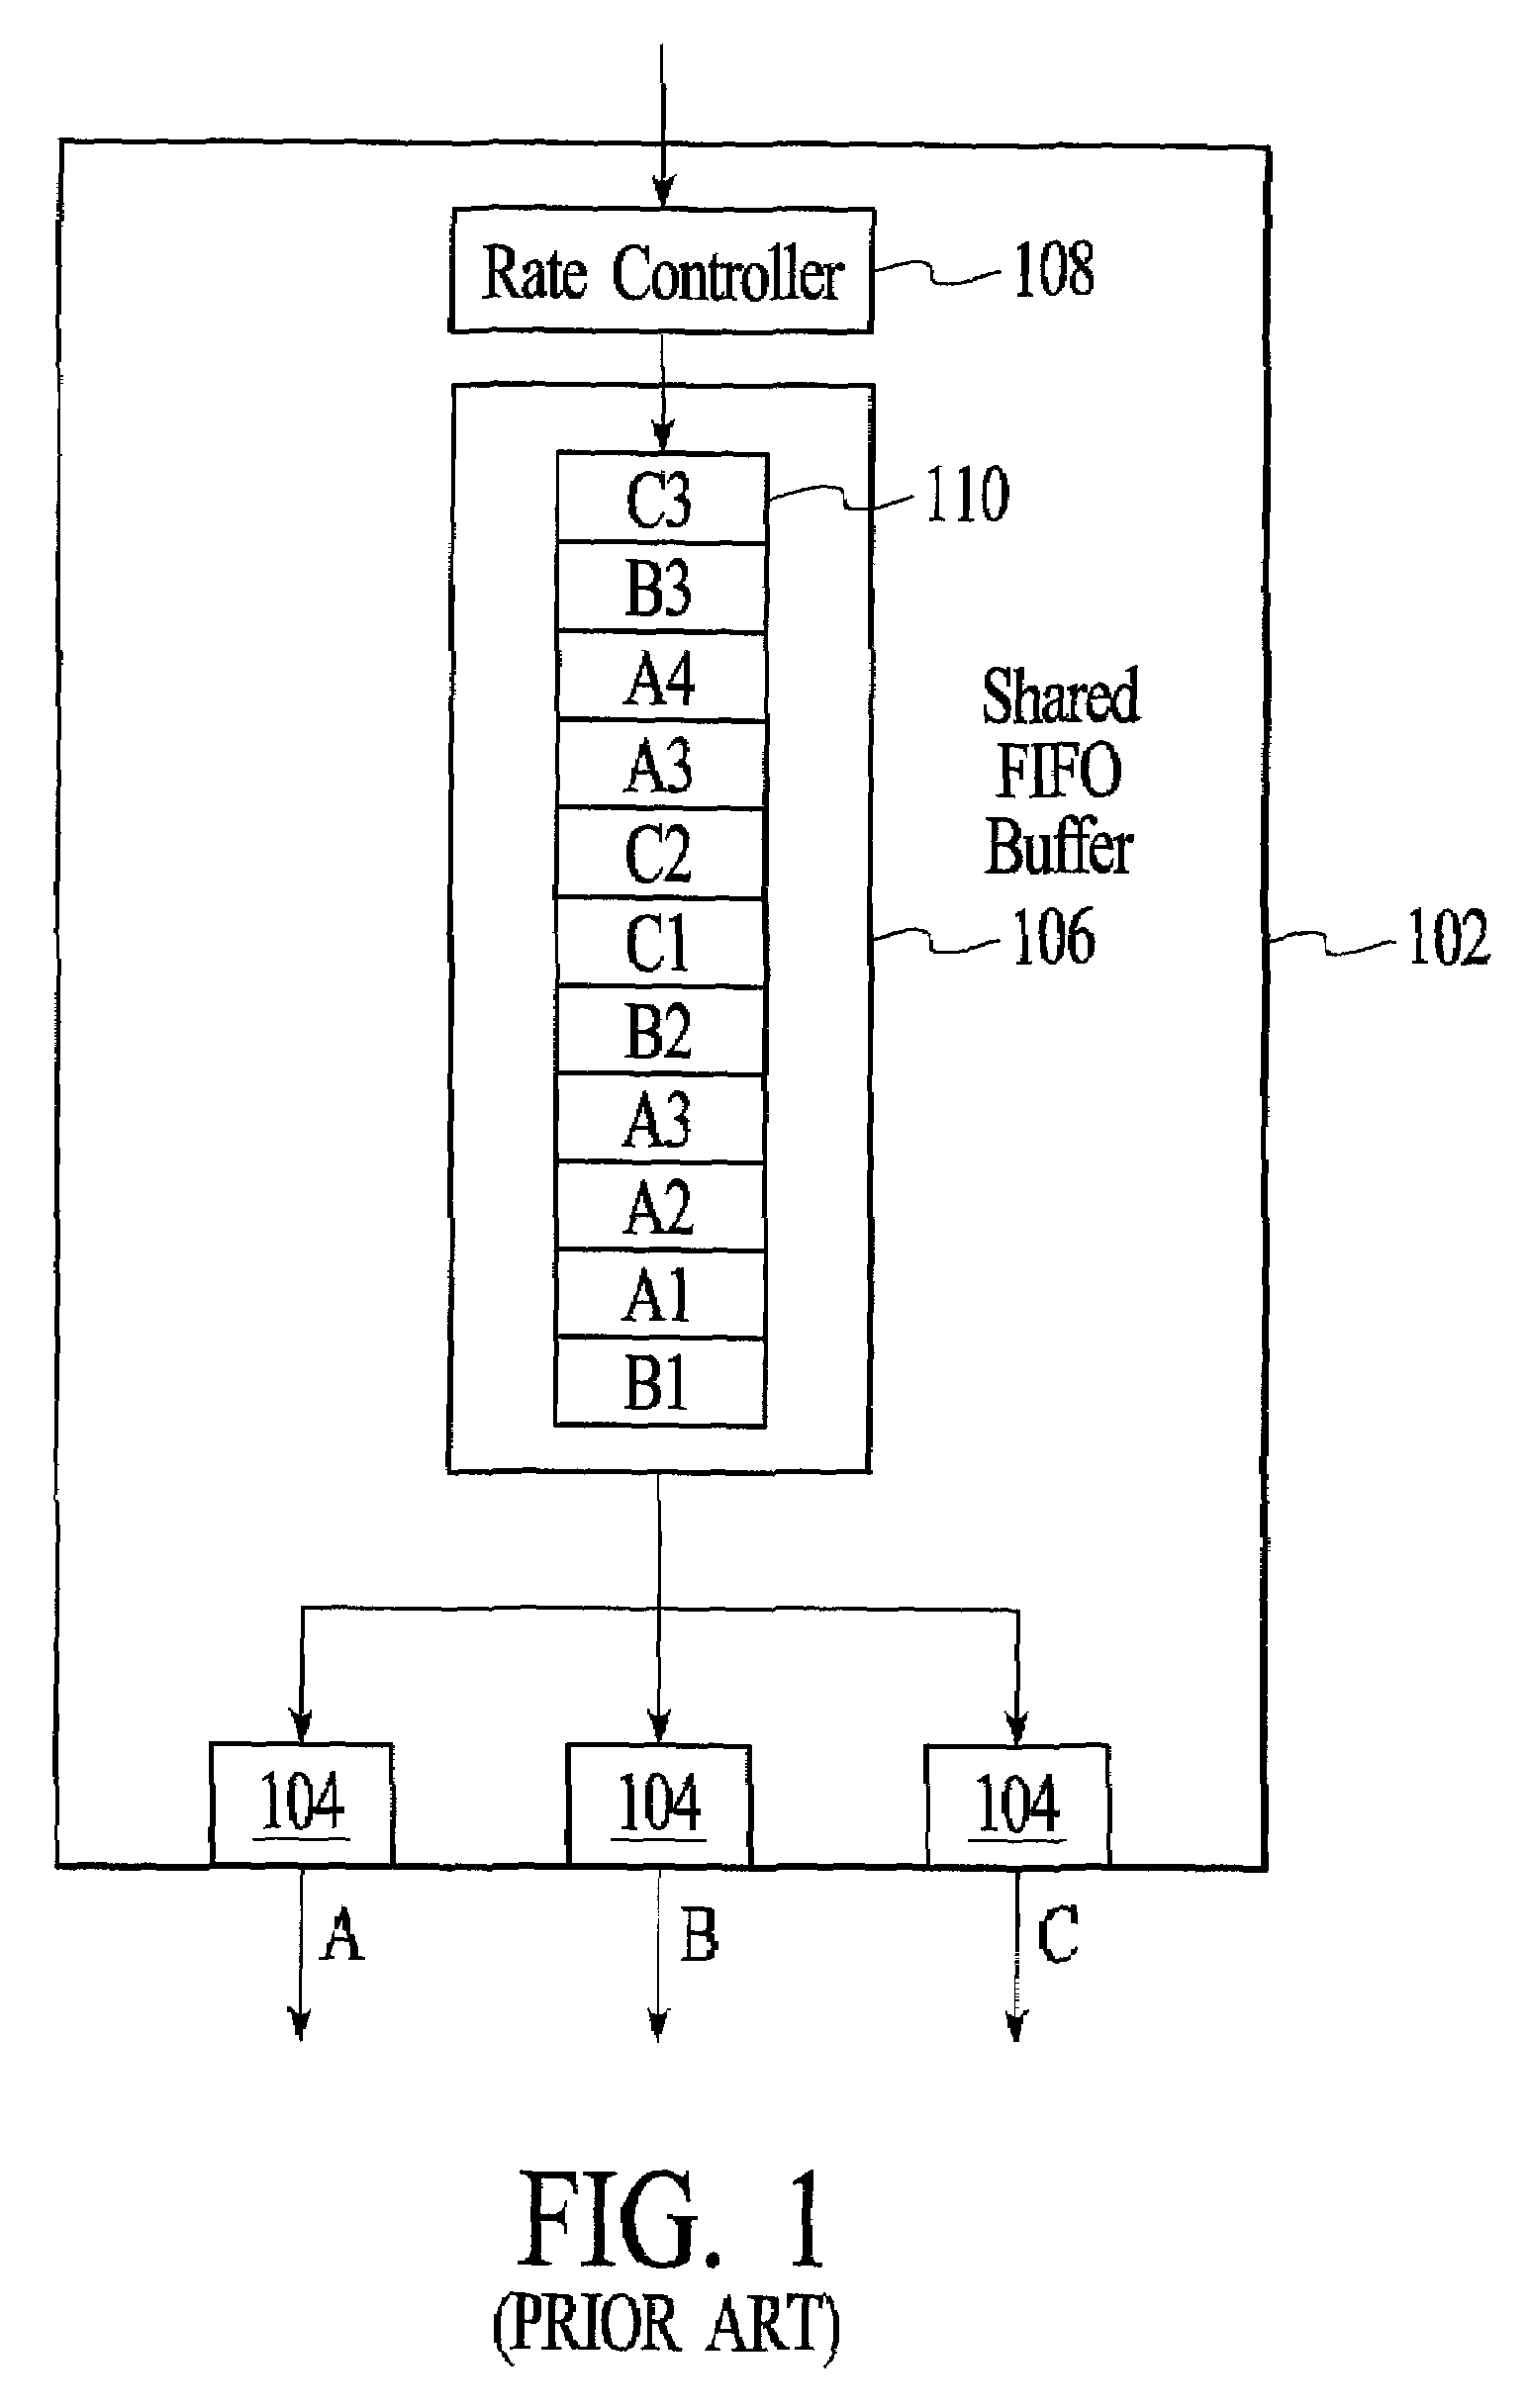 Method and system for managing packets in a shared memory buffer that serves multiple output links